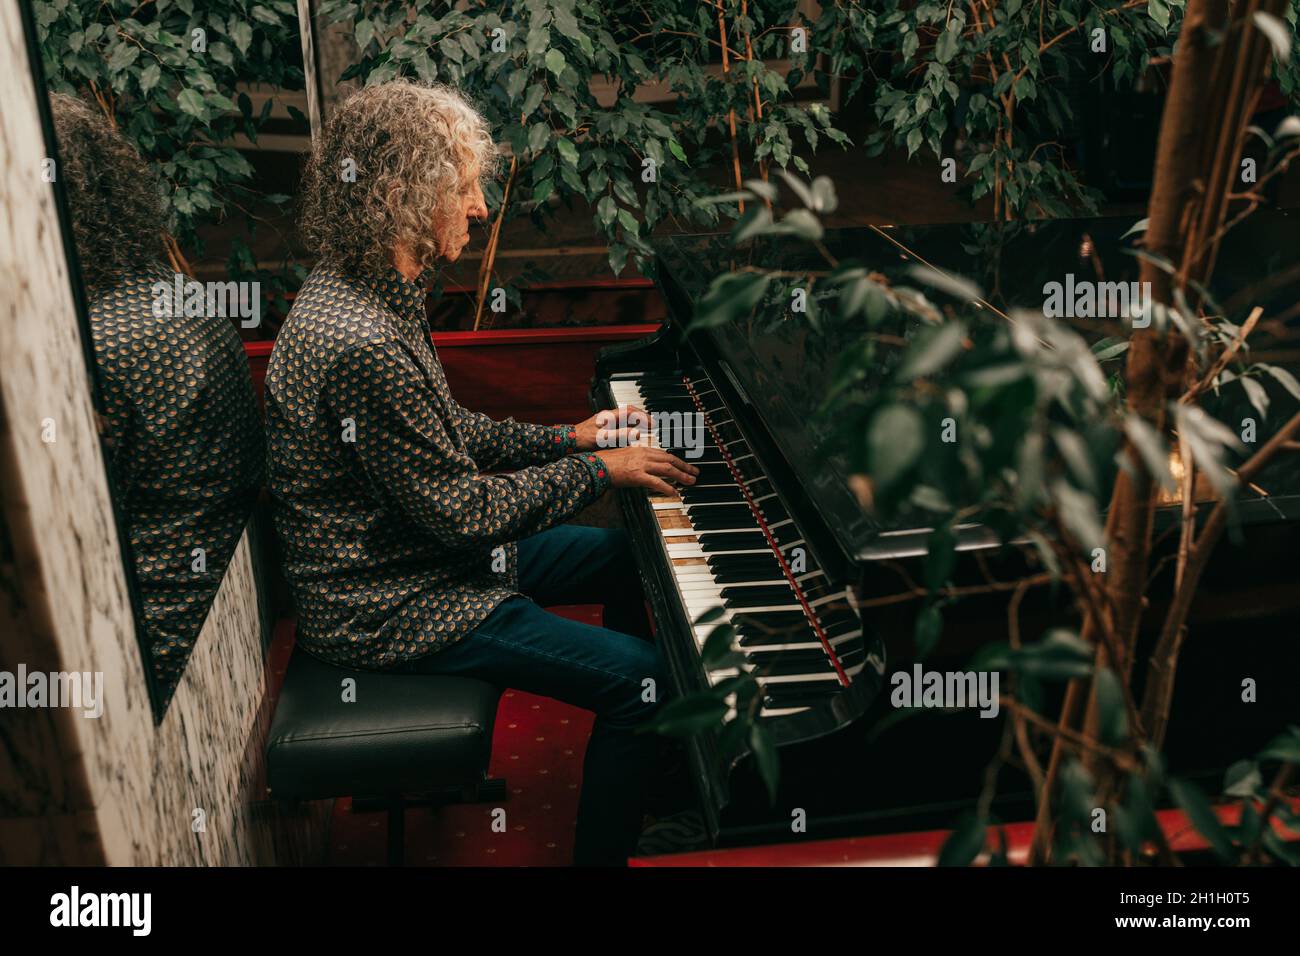 Portrait of man, age 60 - 65 years old, gray curly hair, sitting at piano and playing piece of music, focused, side view. Stock Photo